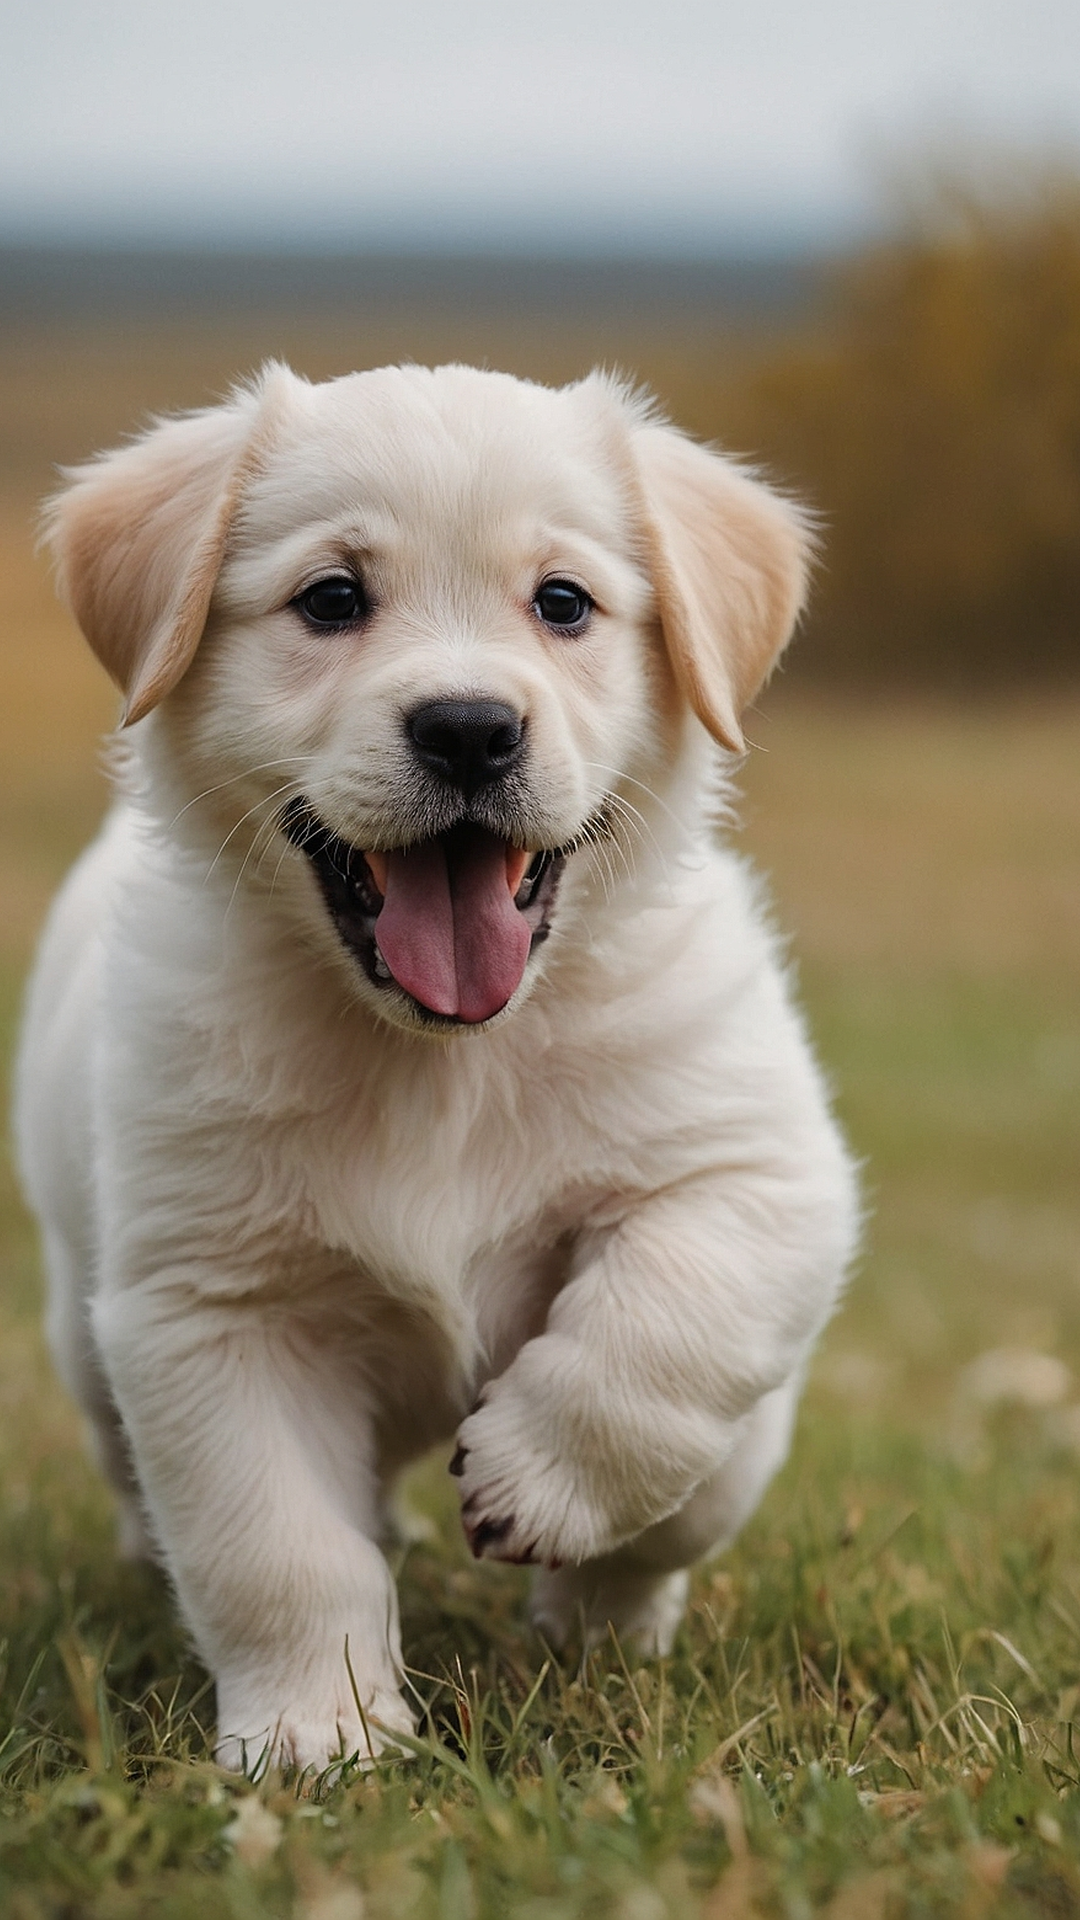 Paws and Play: Cute Puppies at Their Most Playful